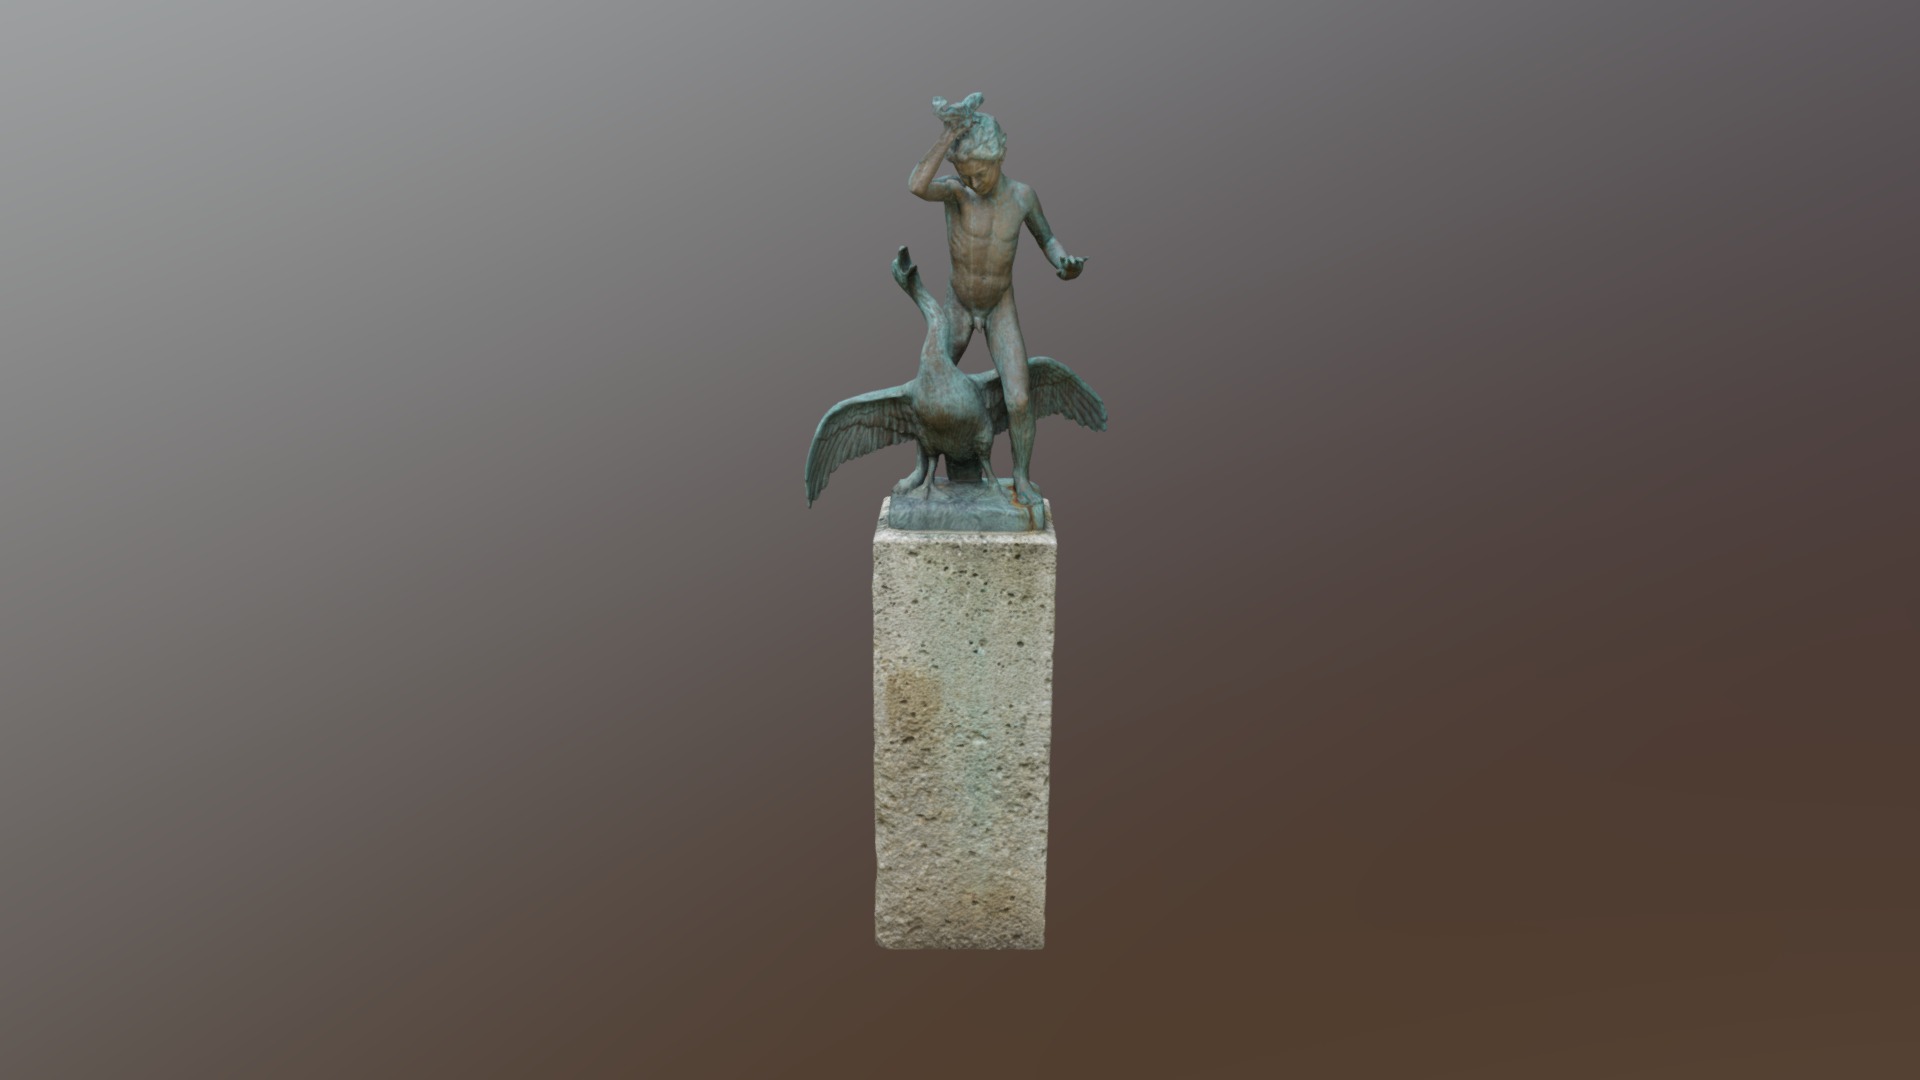 3D model Jüngling mit Gans - This is a 3D model of the Jüngling mit Gans. The 3D model is about a statue of a person with a sword and a shield.